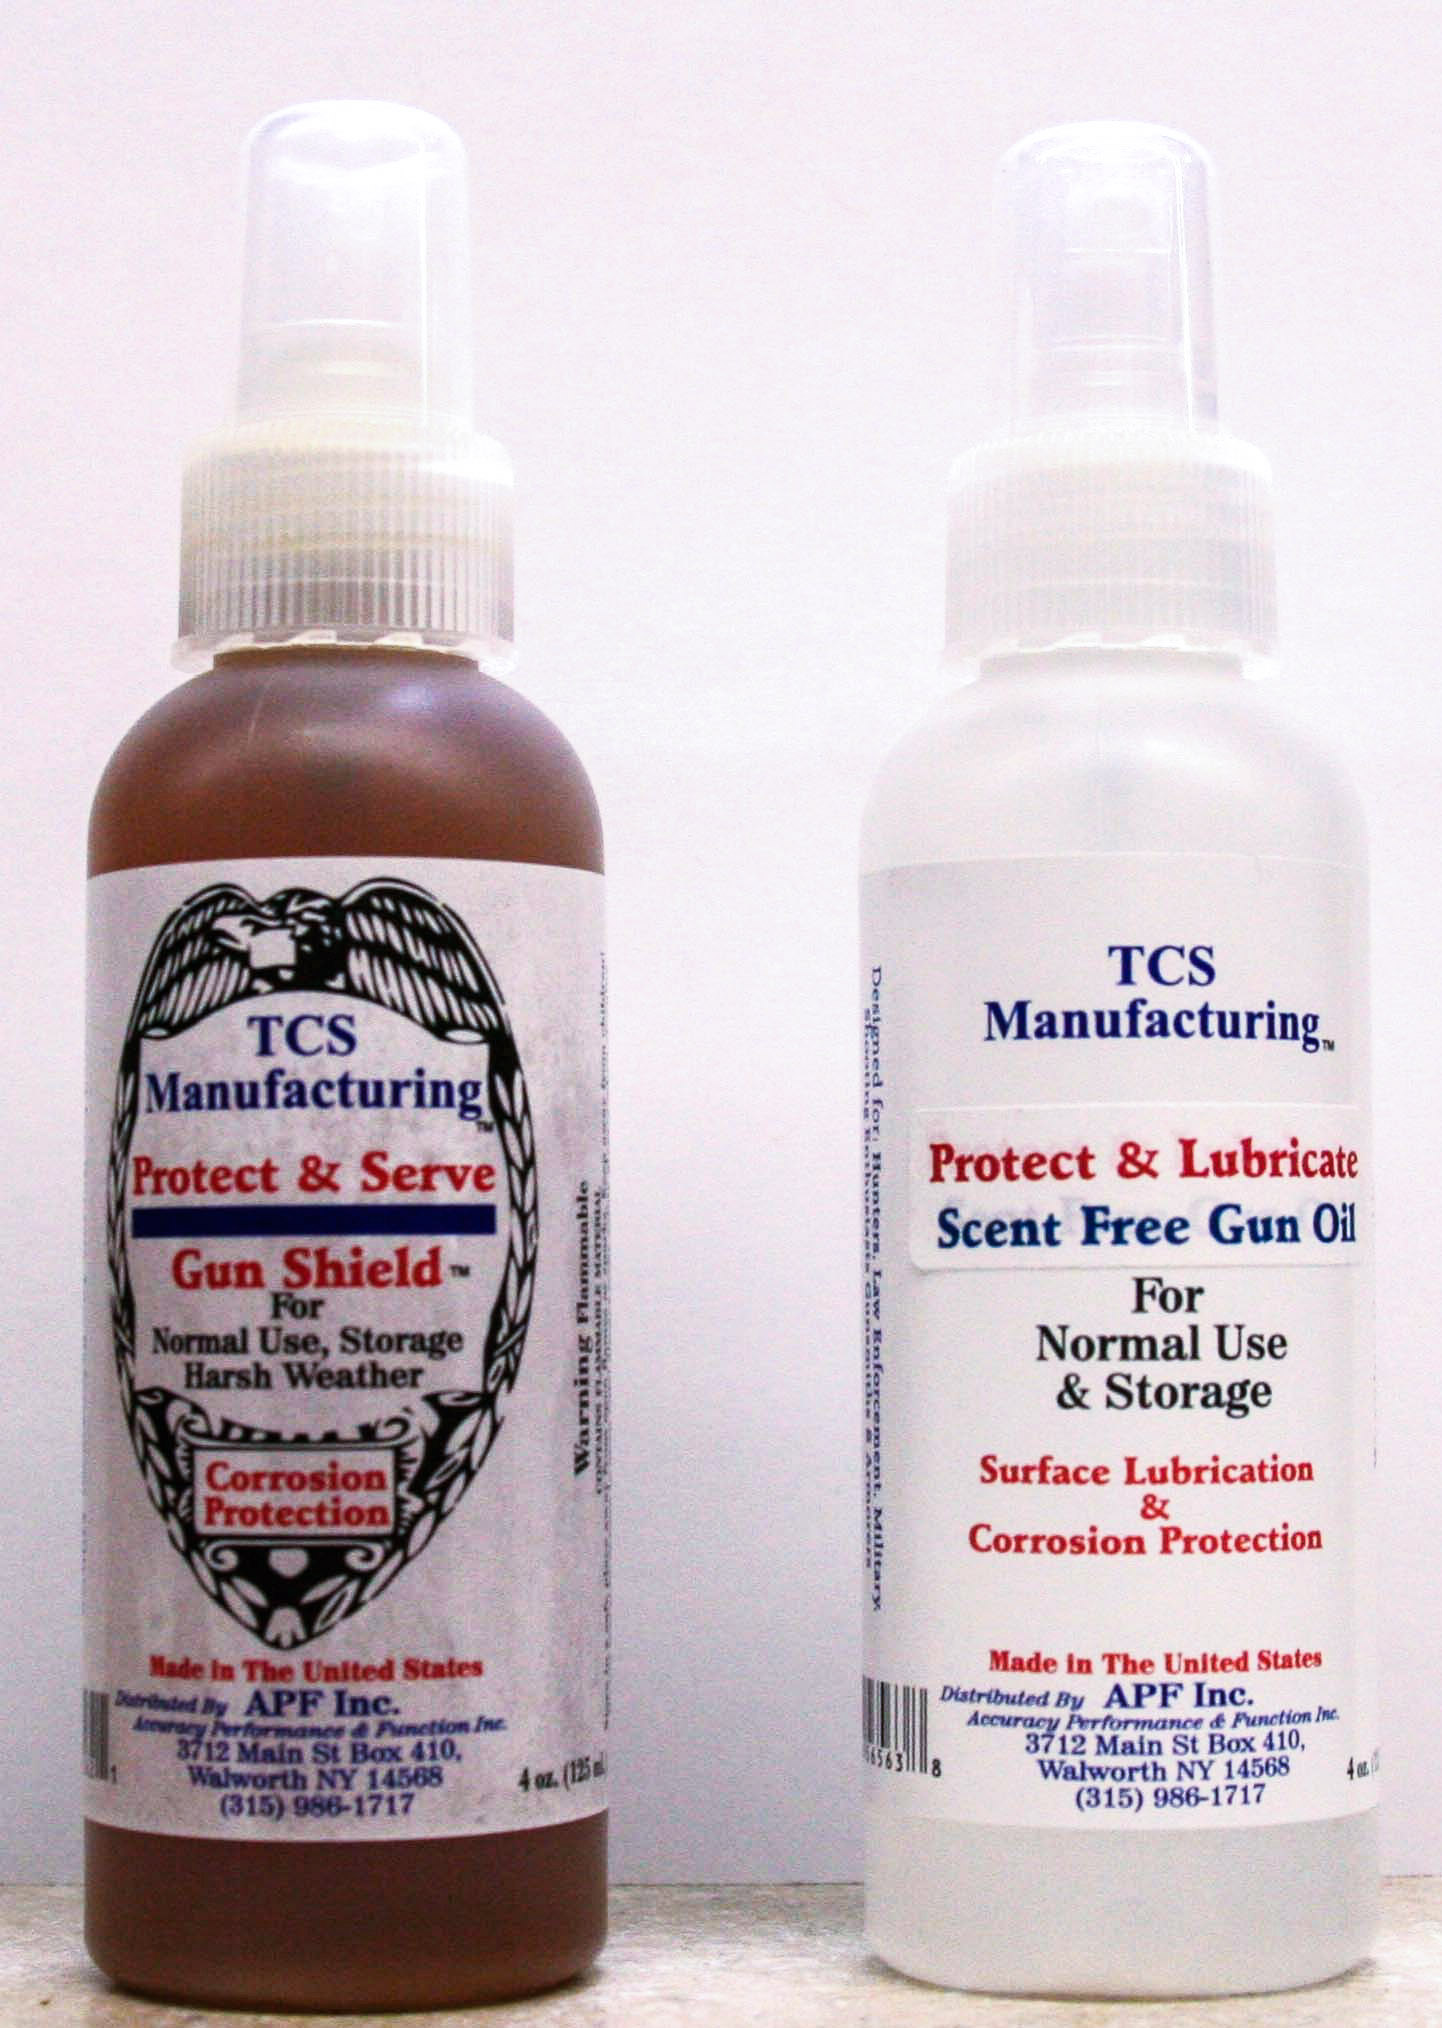 TCS Manufacturing Protect and Serve Gun Shield and Protect and Lubricate